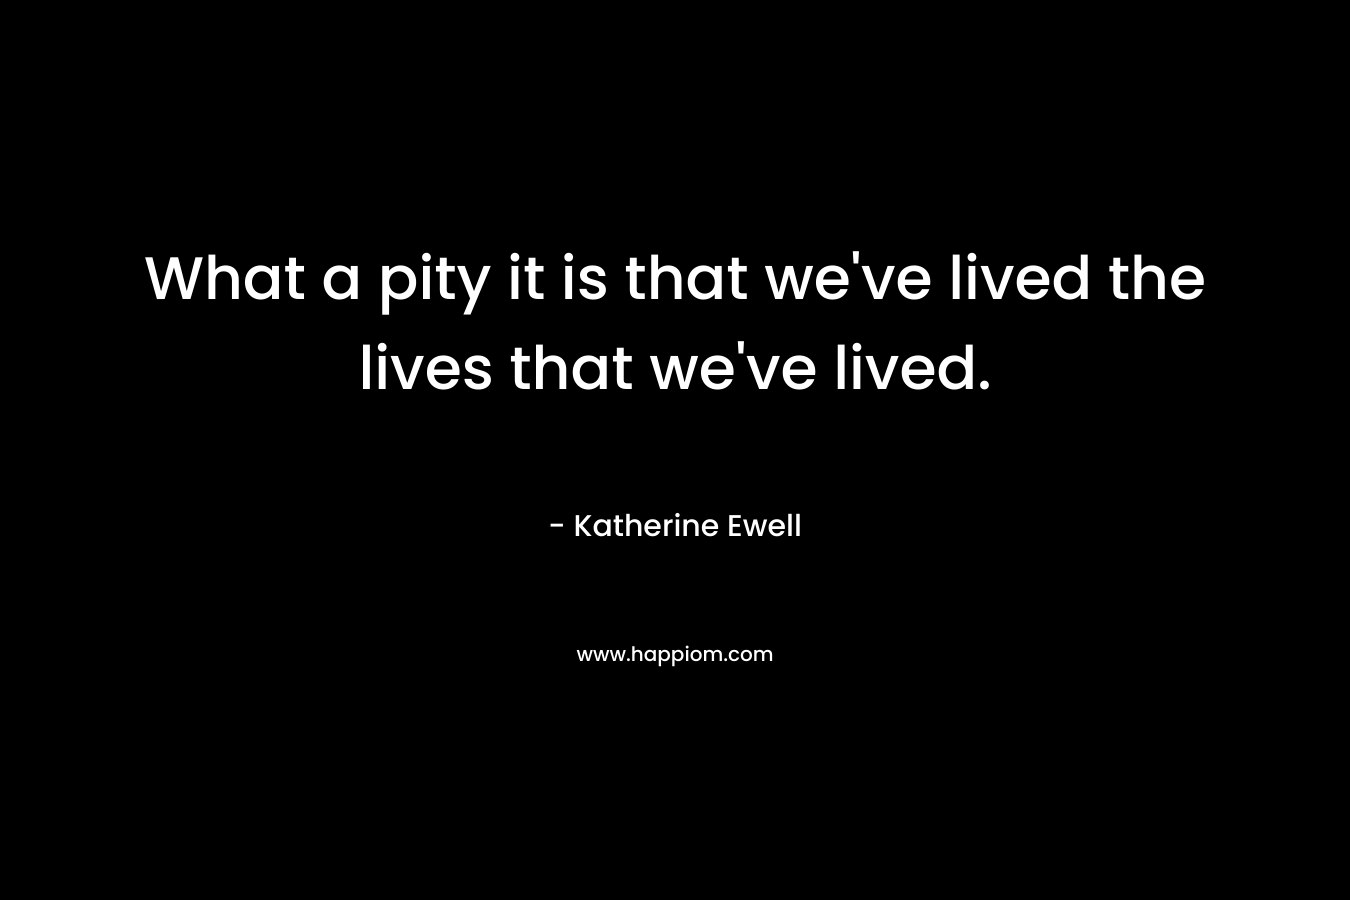 What a pity it is that we’ve lived the lives that we’ve lived. – Katherine Ewell